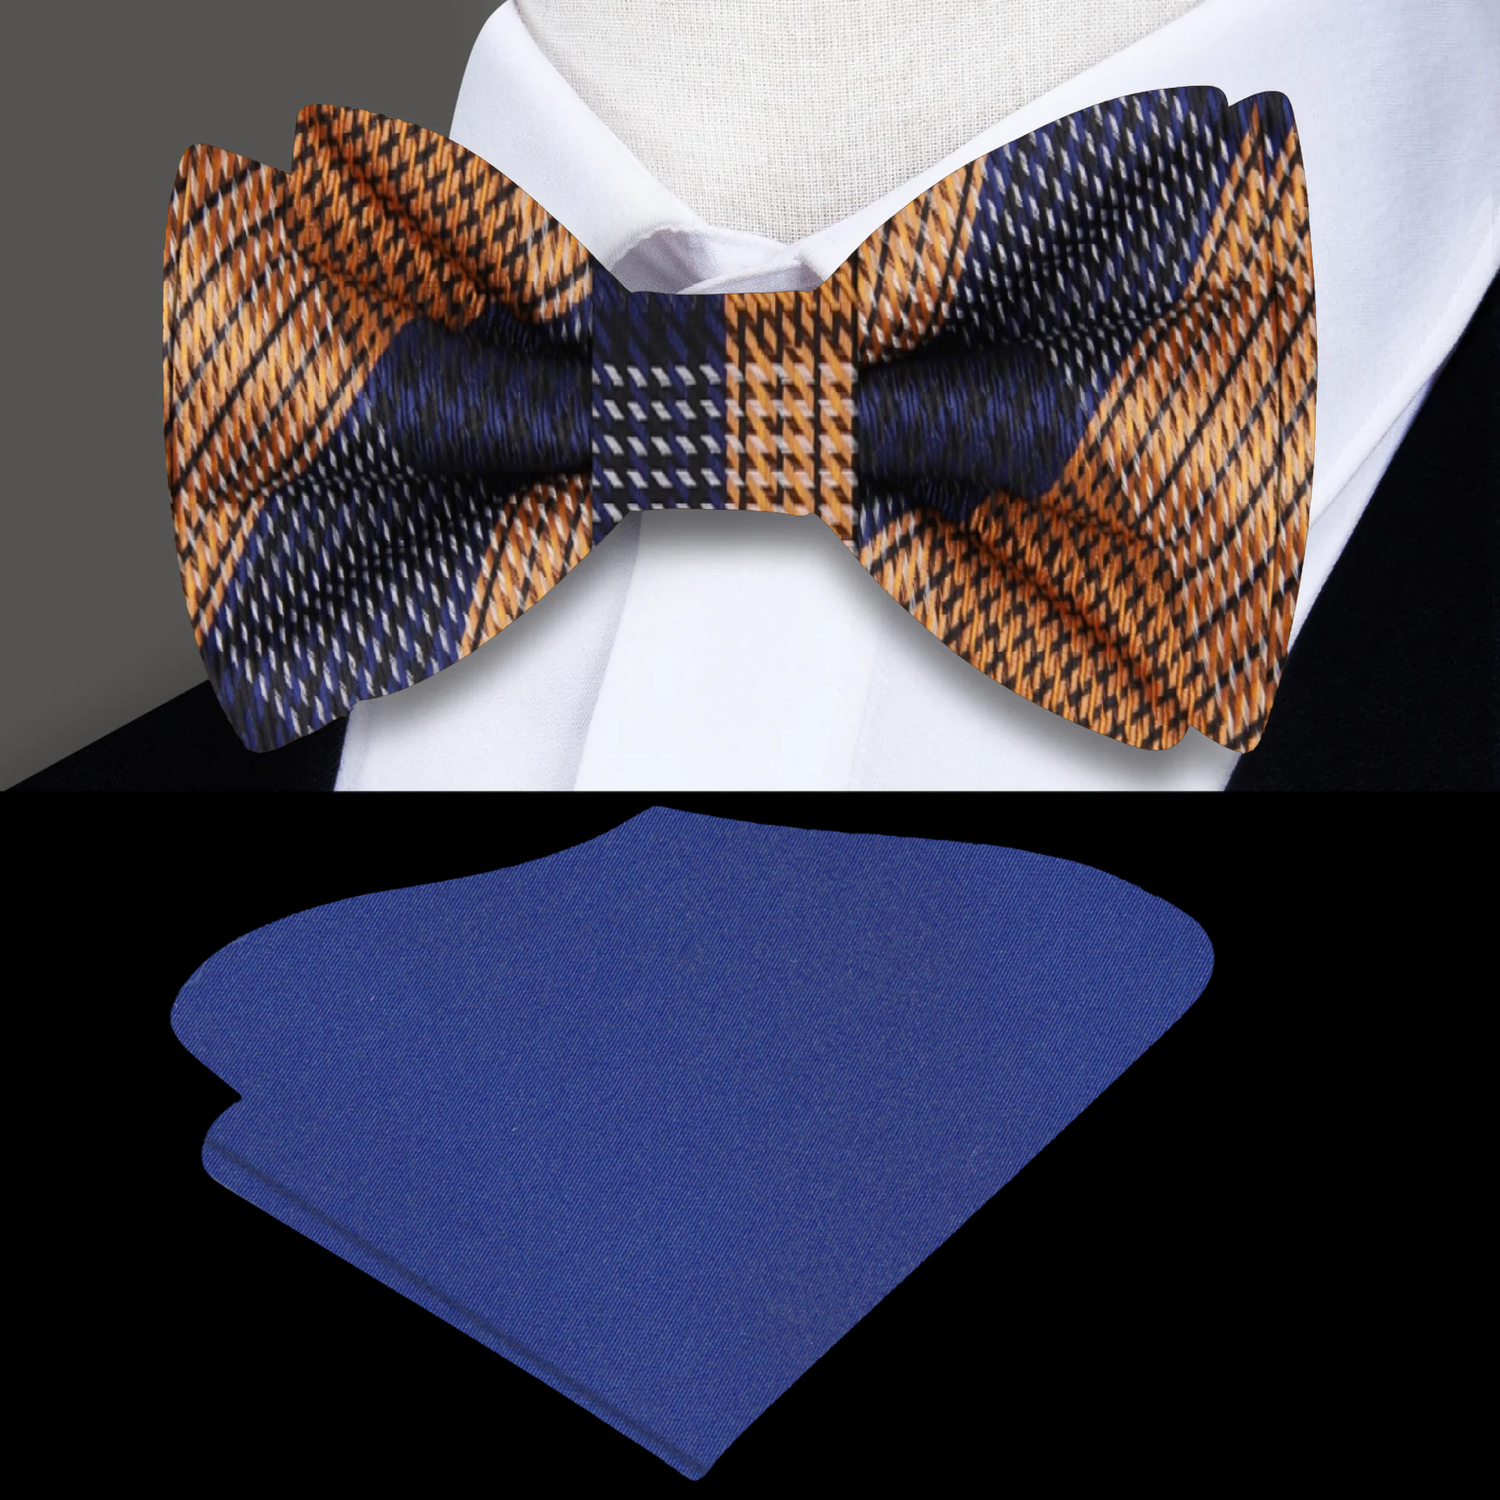 Main: Orange and Blue Plaid Bow Tie and Blue Square